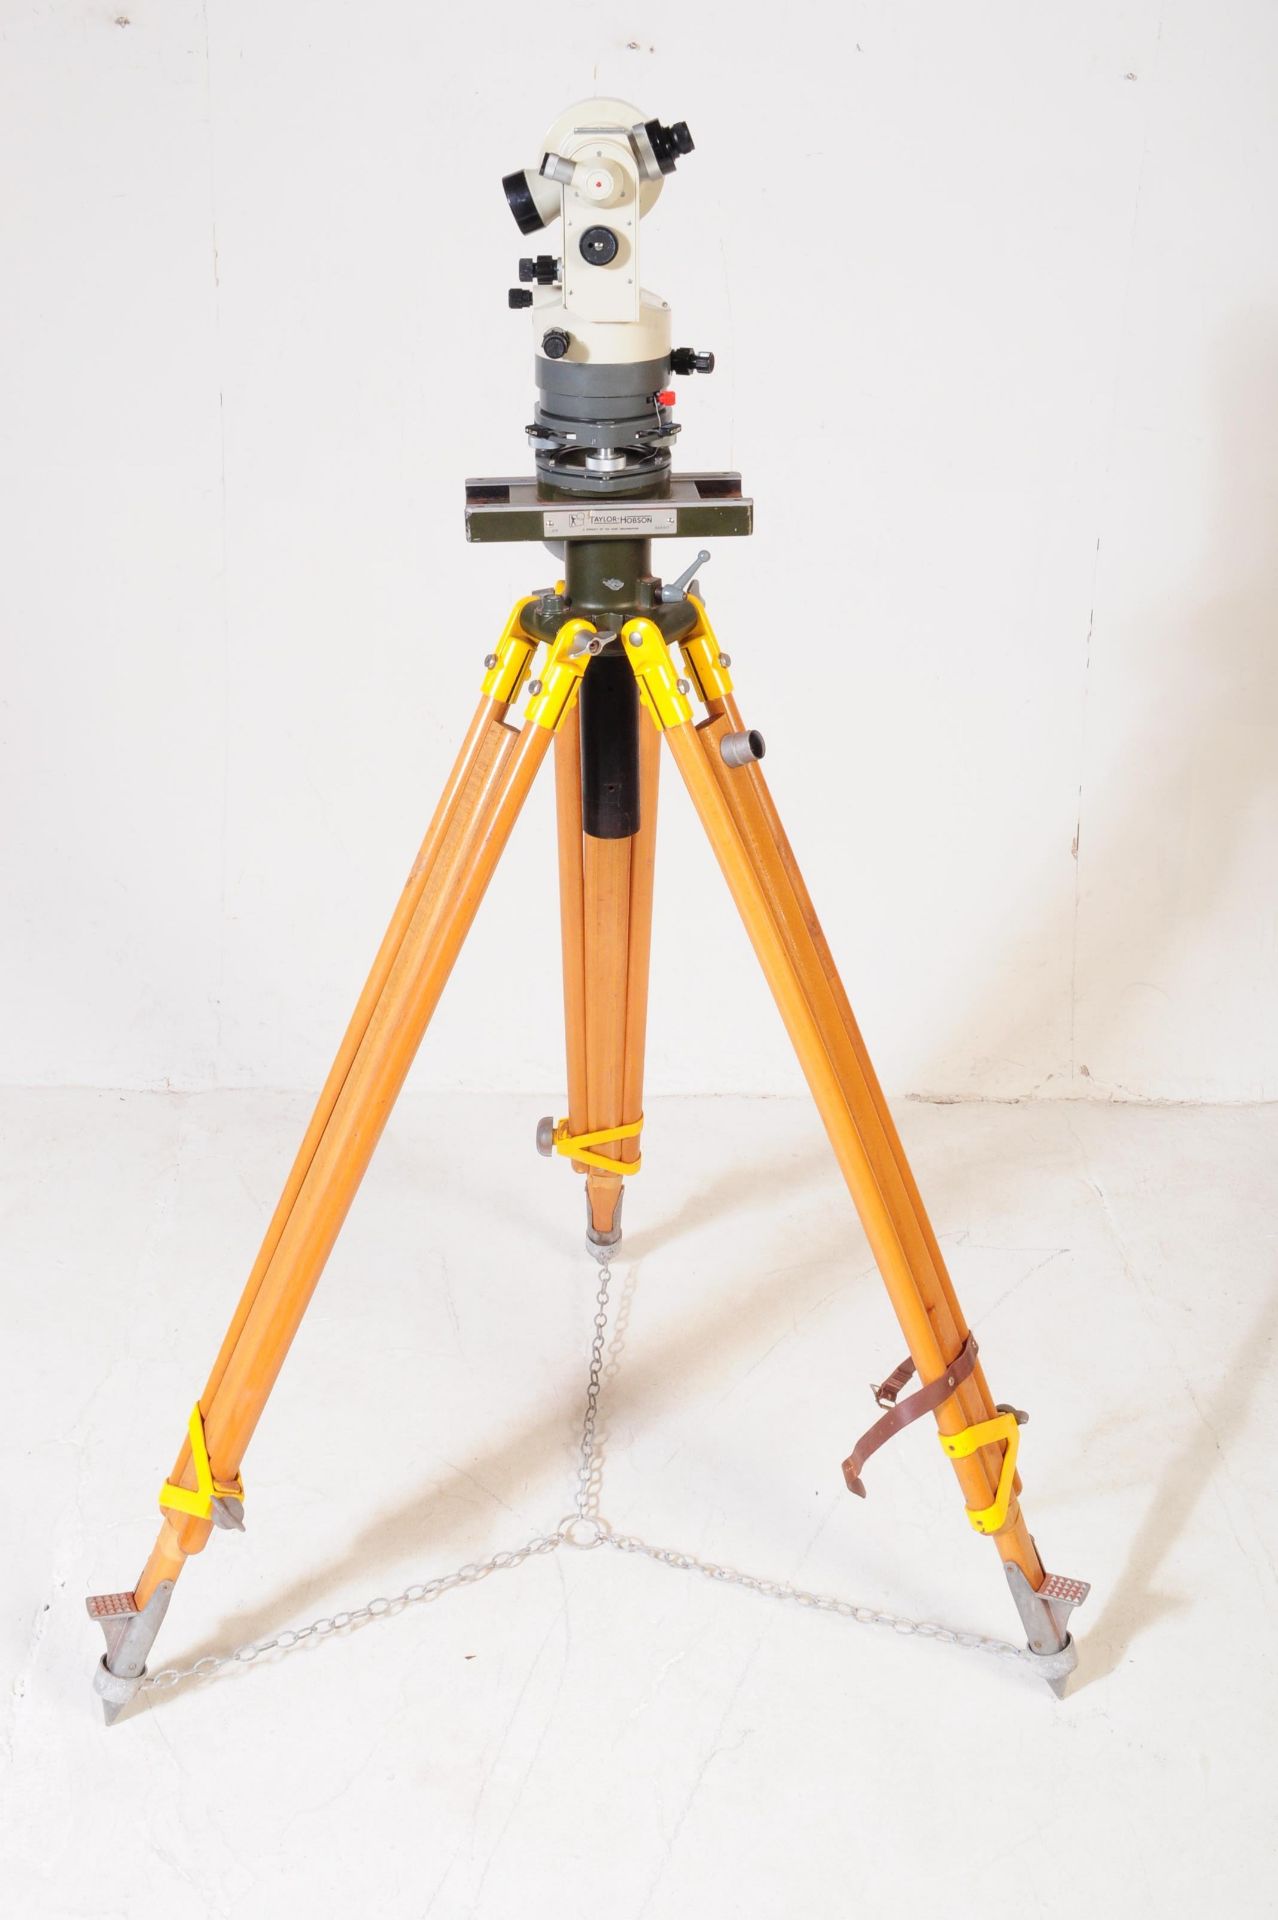 A HILGER & WATTS MICROPTIC THEODOLITE WITH TRIPOD STAND / CASE - Image 2 of 9